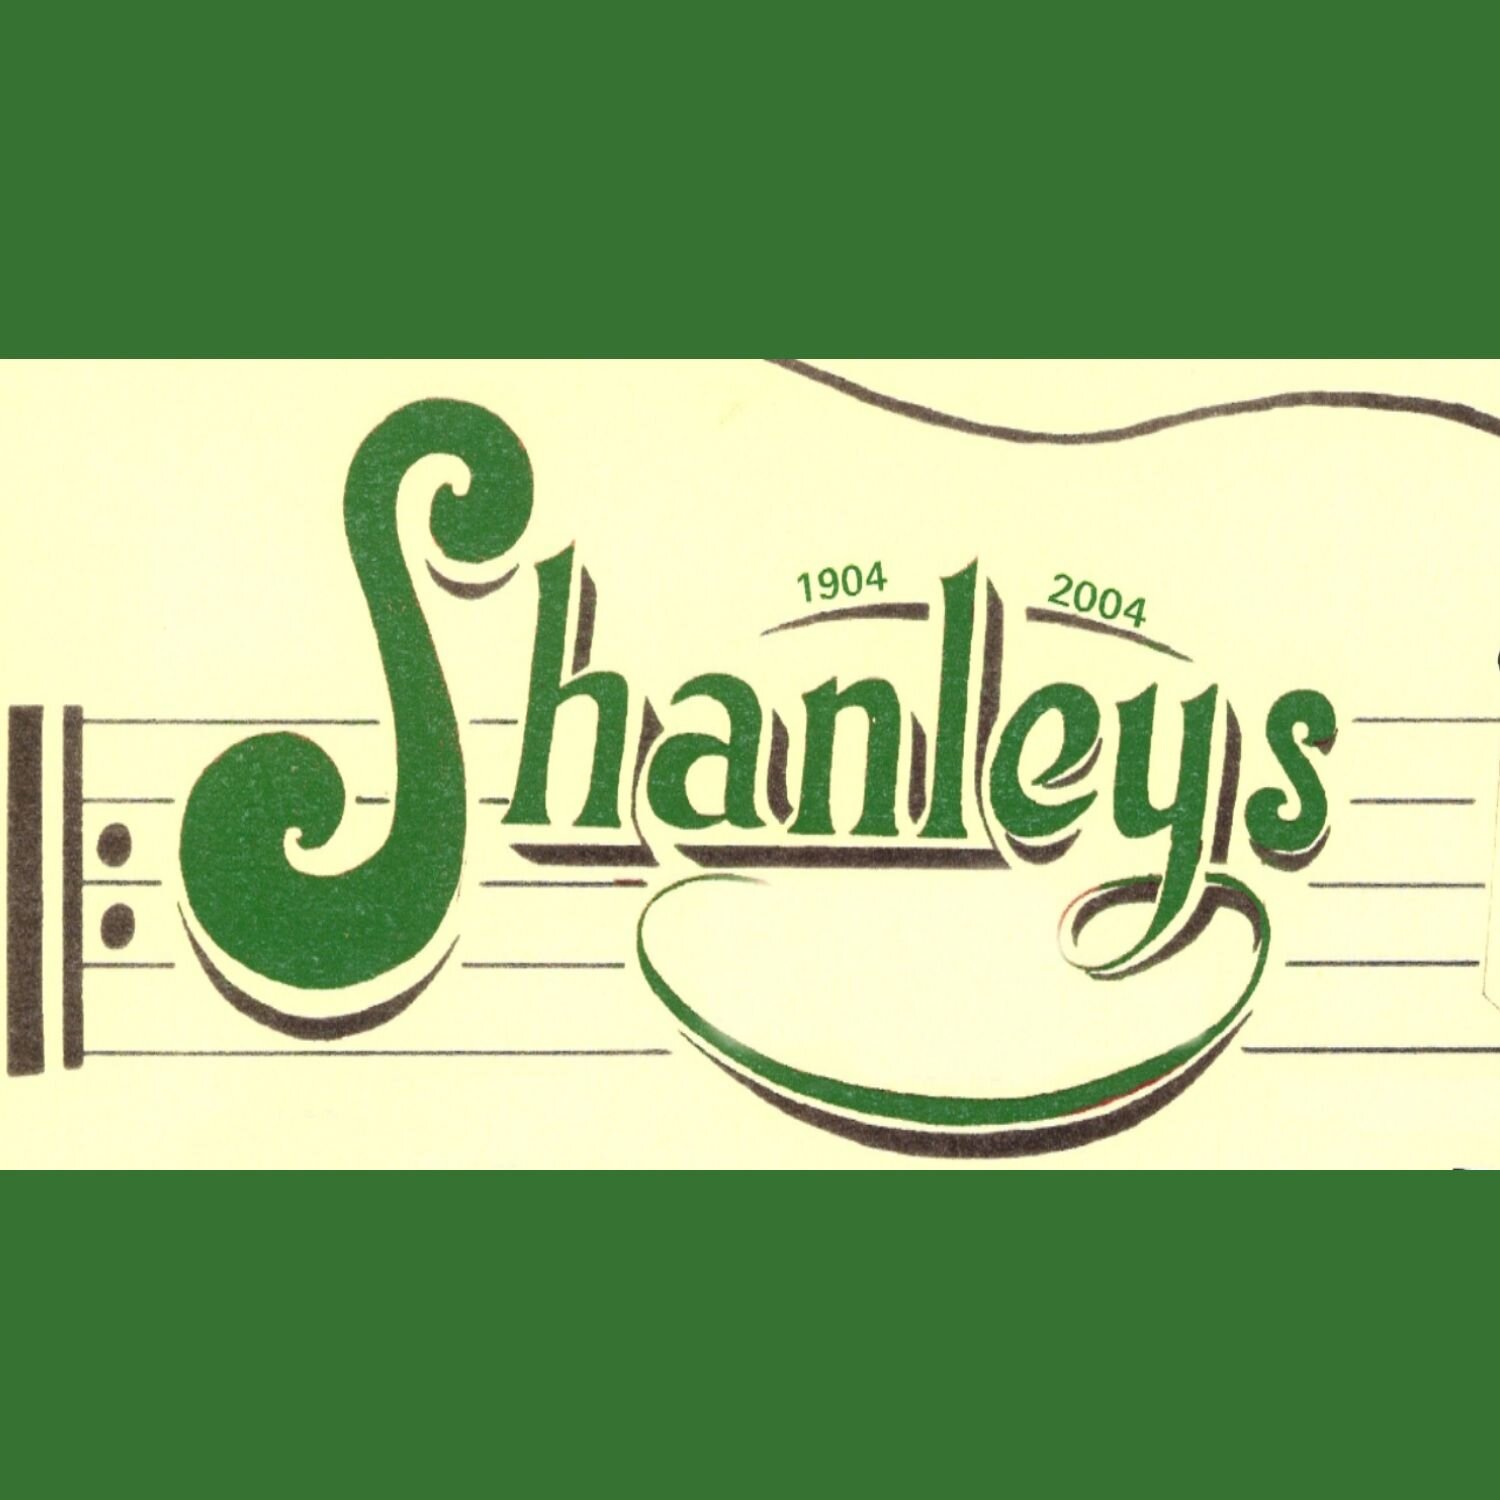 Shanley’s Bar has been in the Shanley Family since 1904. Shanley’s is renowned for its great live music and warm, friendly atmosphere.